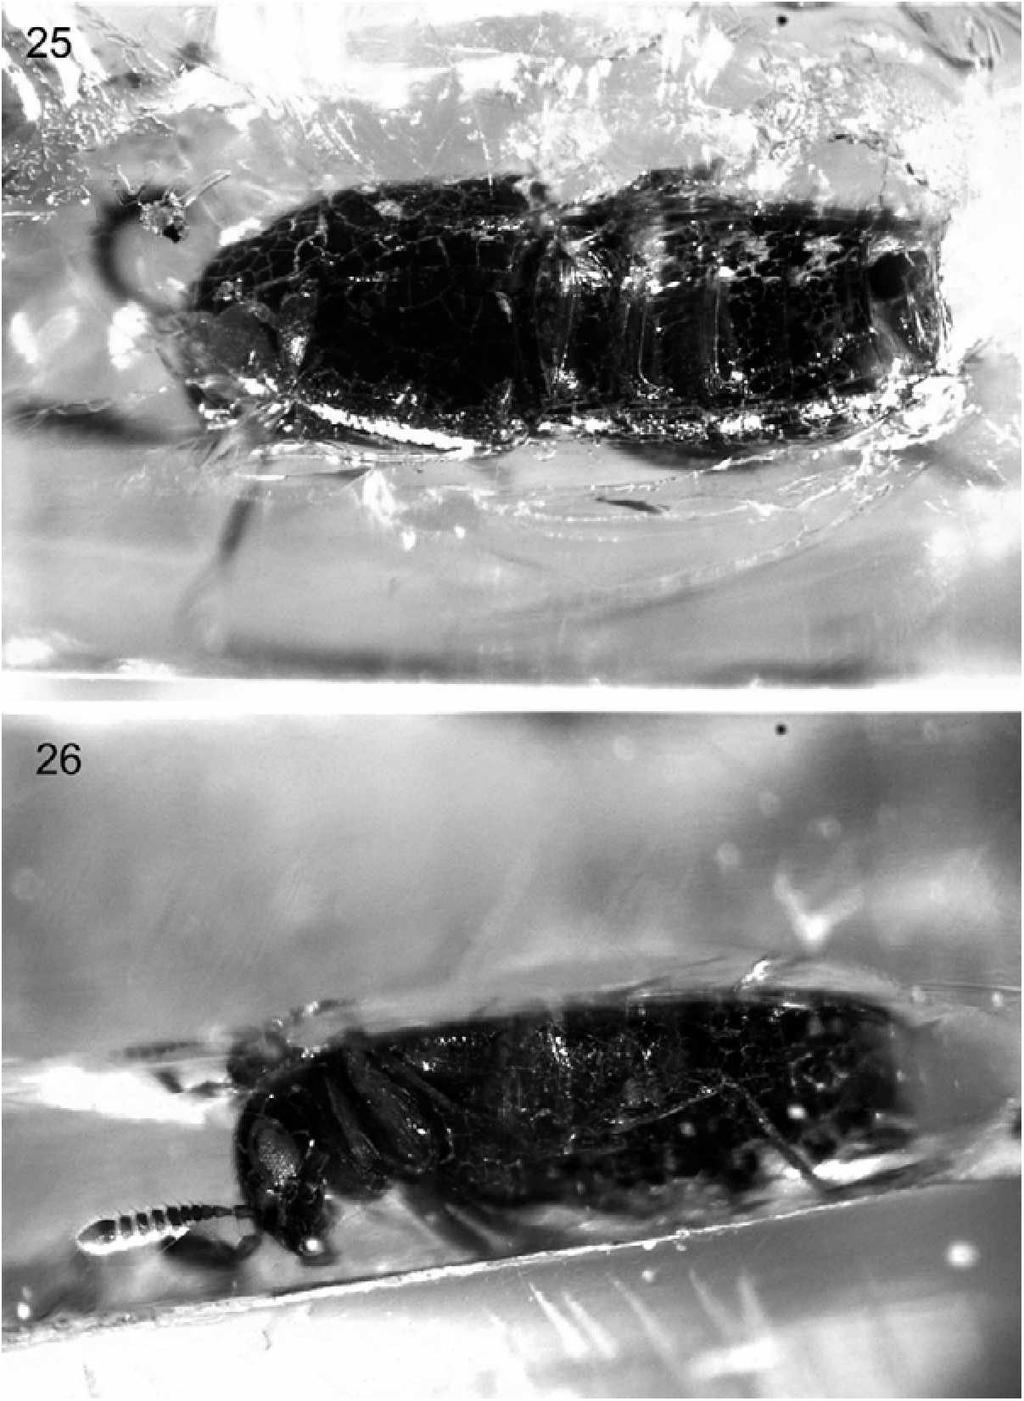 Figs 25-26: Aleochara baltica sp.n. 25 - habitus in dorsal view; 26 - habitus in lateral view. Affinity.